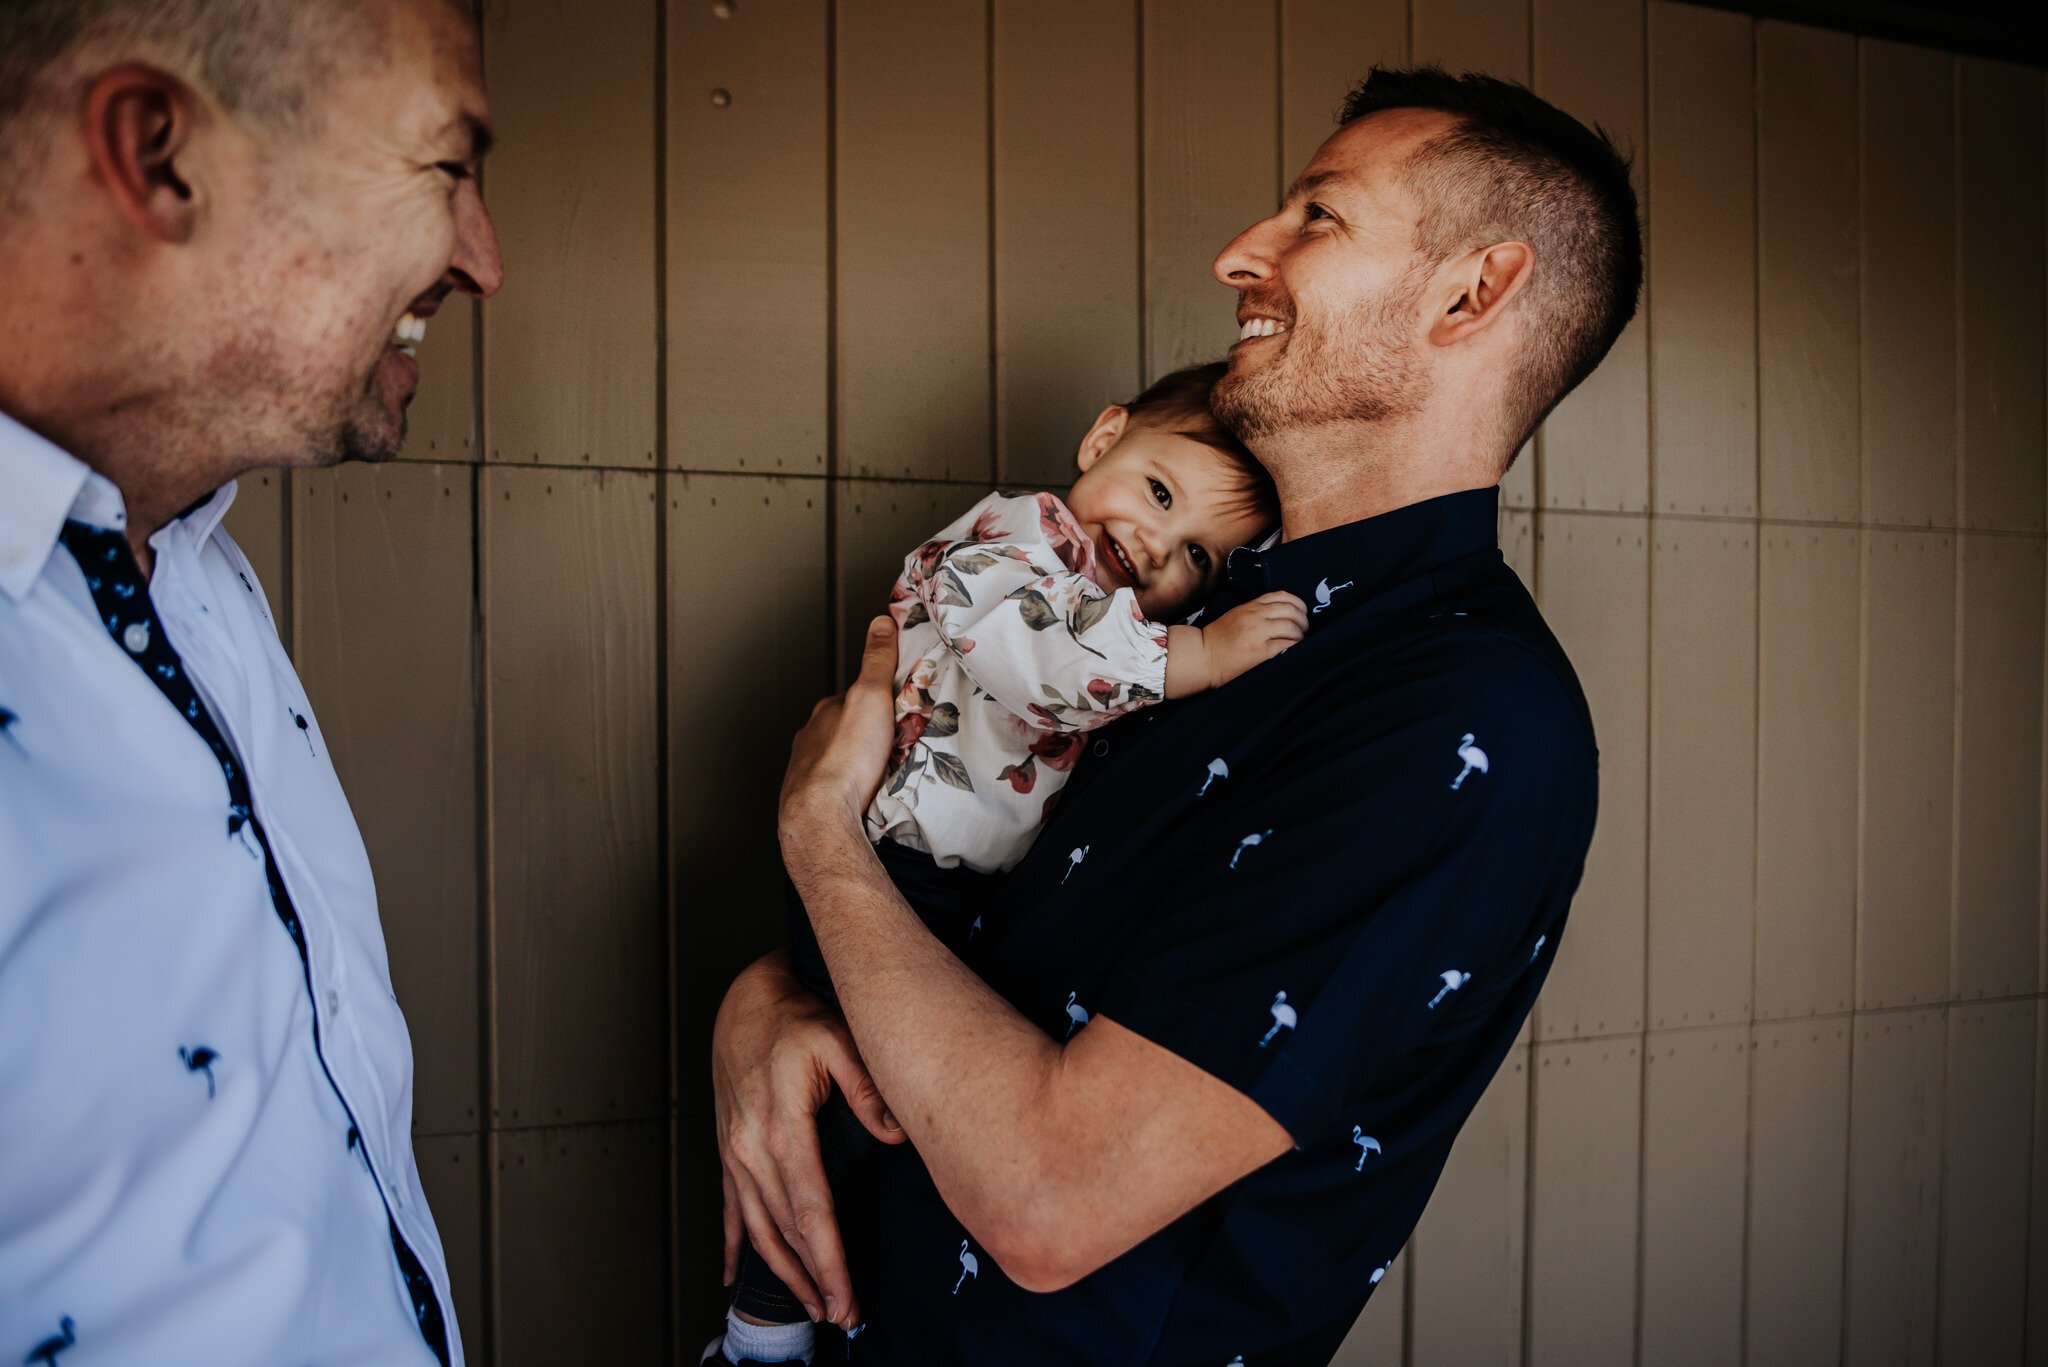 Paul+and+Dave+Gay+Couple+Family+Session+Colorado+Springs+Colorado+LGBTQ+Dads+Daughter+Wild+Prairie+Photography-26-2020.jpeg